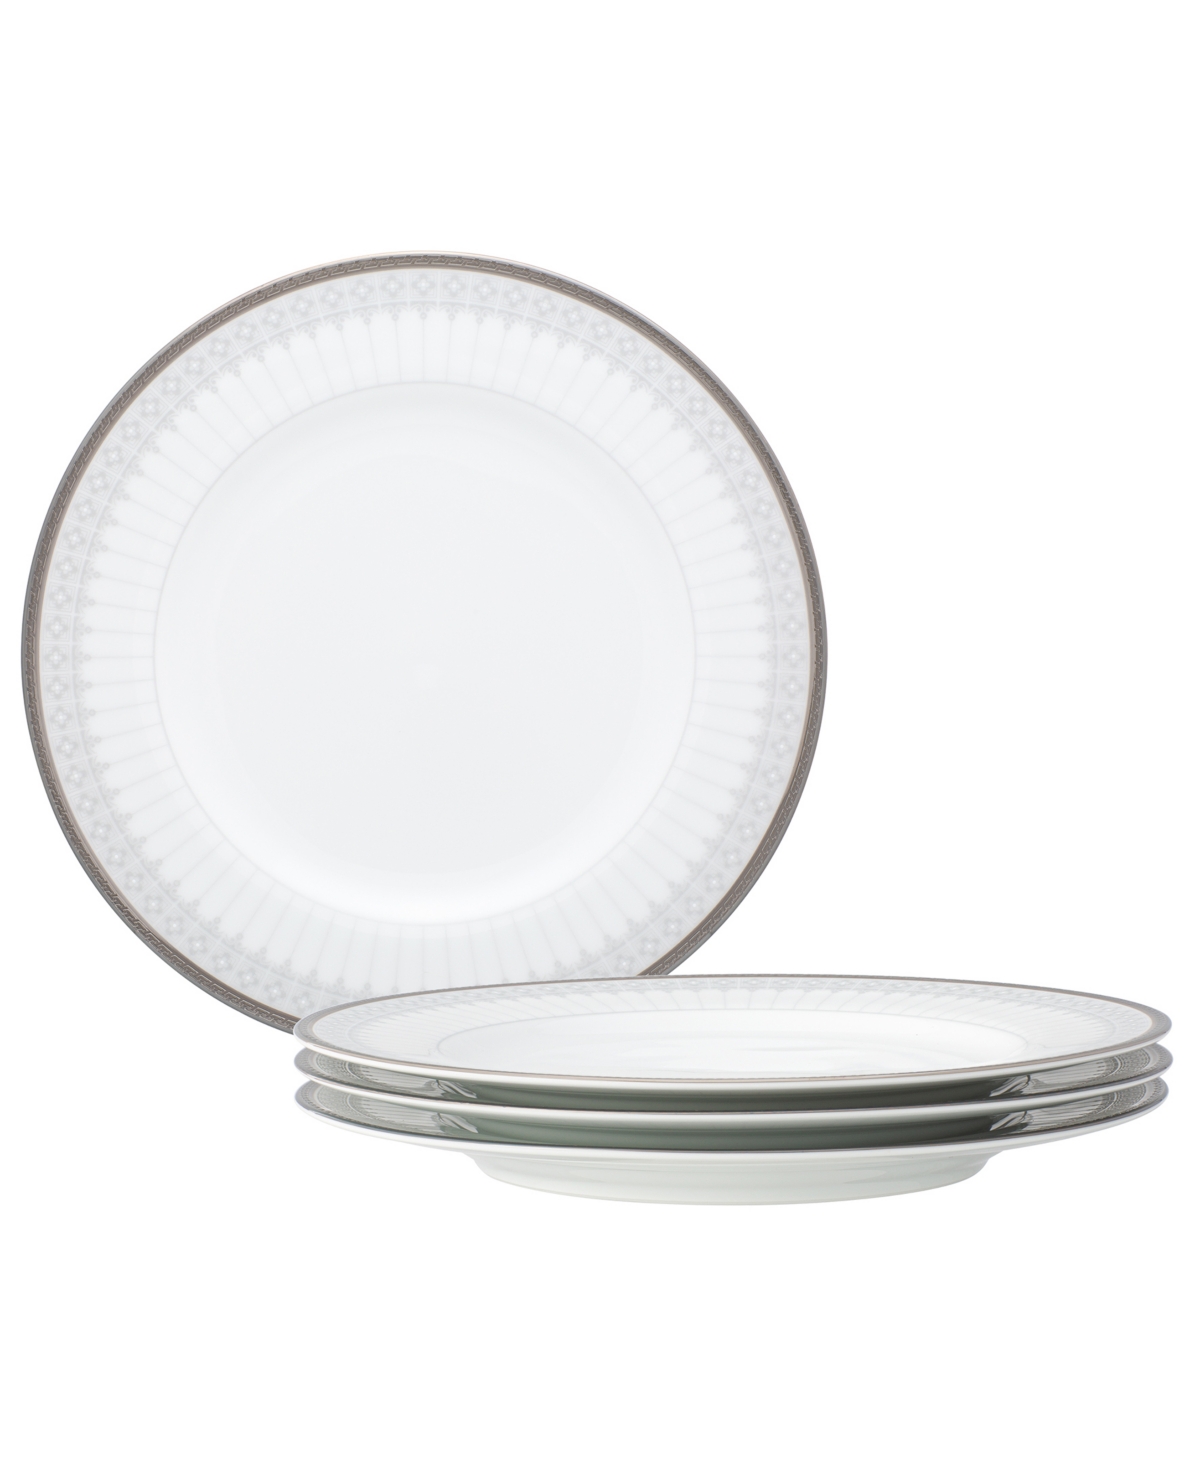 Noritake Silver Colonnade 4 Piece Salad Plate Set, Service For 4 In White